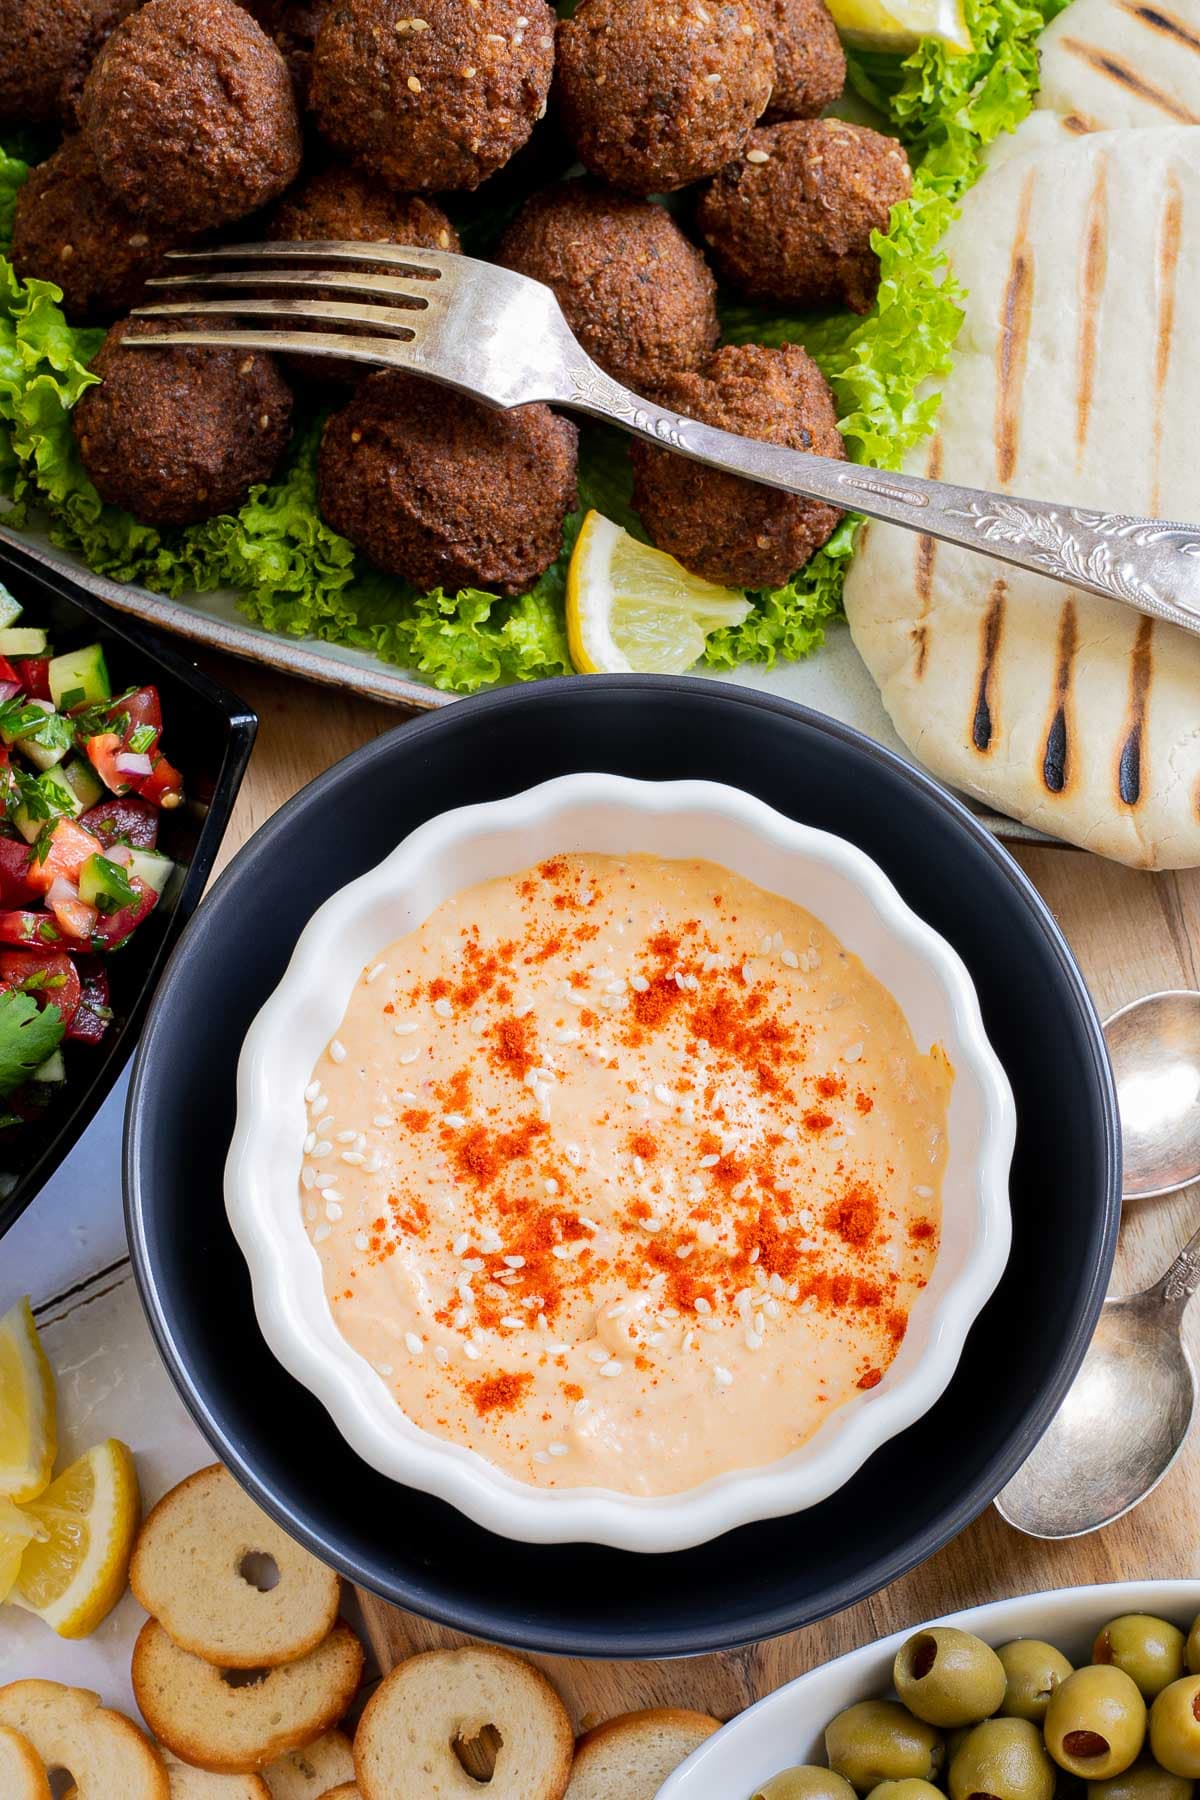 Orange hummus in white-black bowl. Falafel balls, pita breads, green olives, and chopped red green veggie salad is on the side.